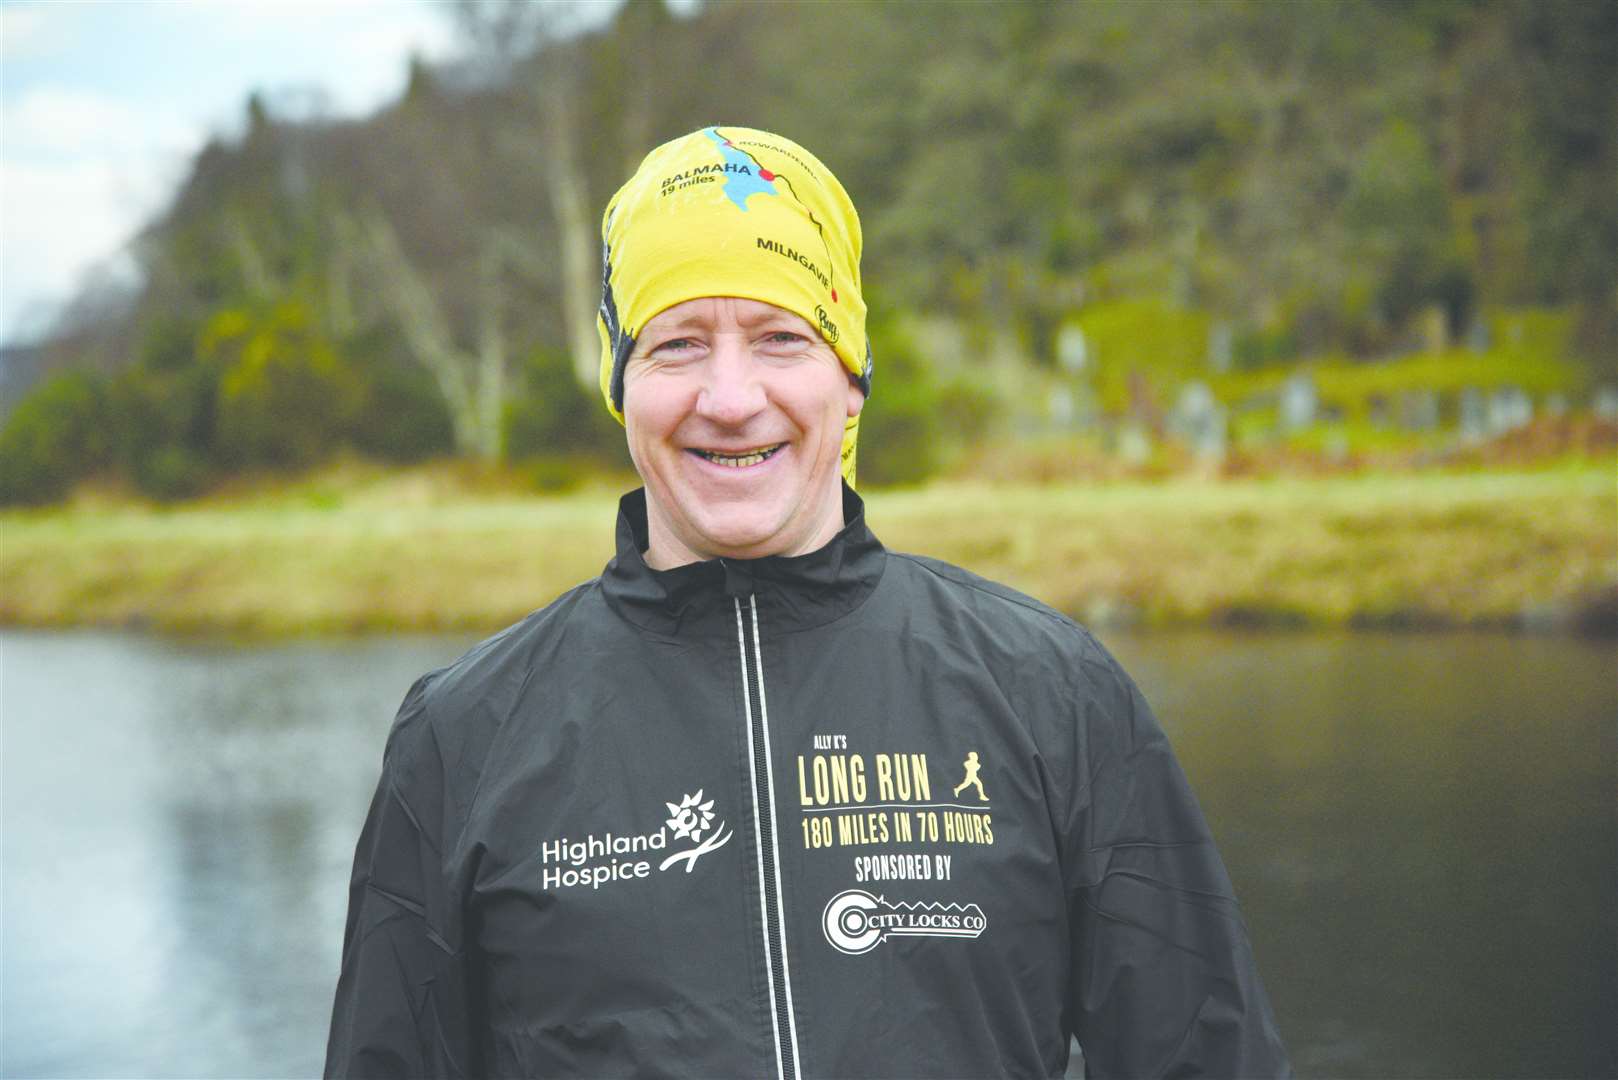 Alistair "Ally K" Macpherson training for his 180 mile run from Glasgow to Inverness in July.